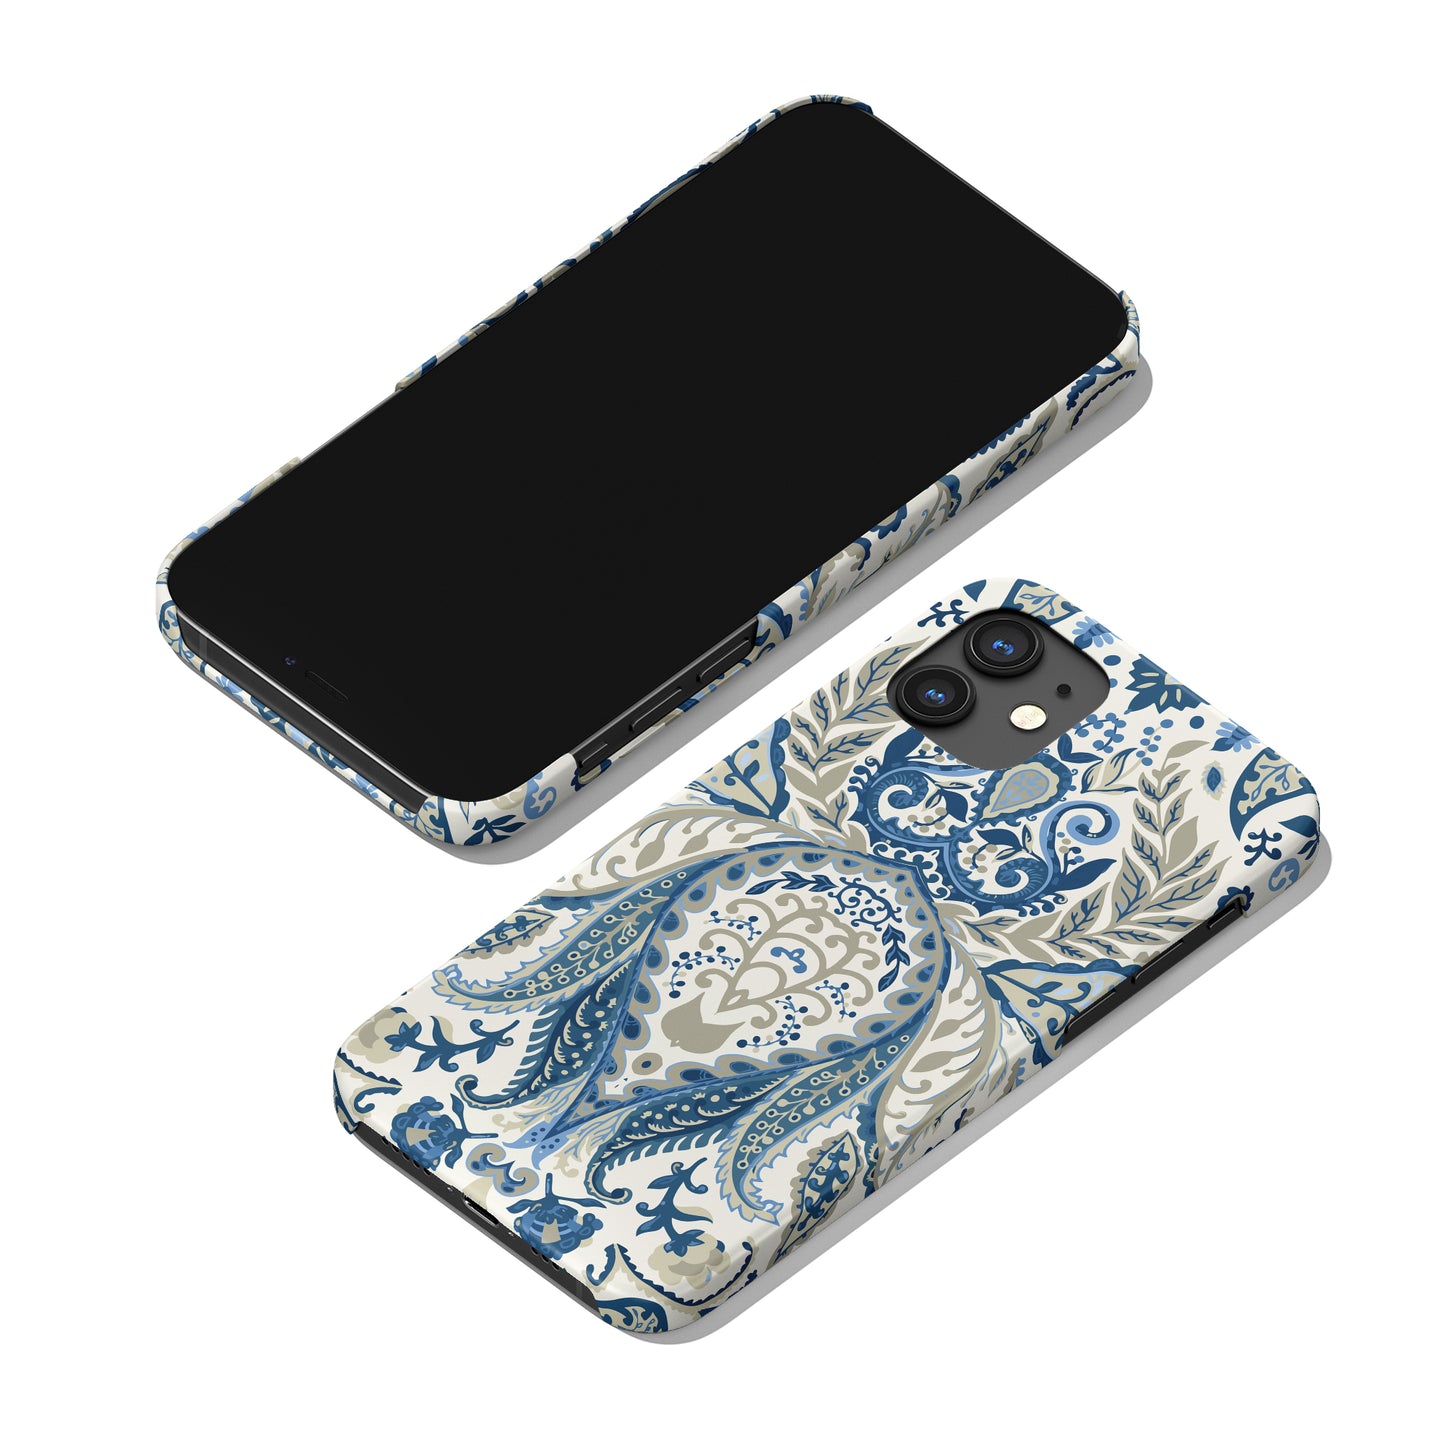 Blue Ornaments iPhone Case